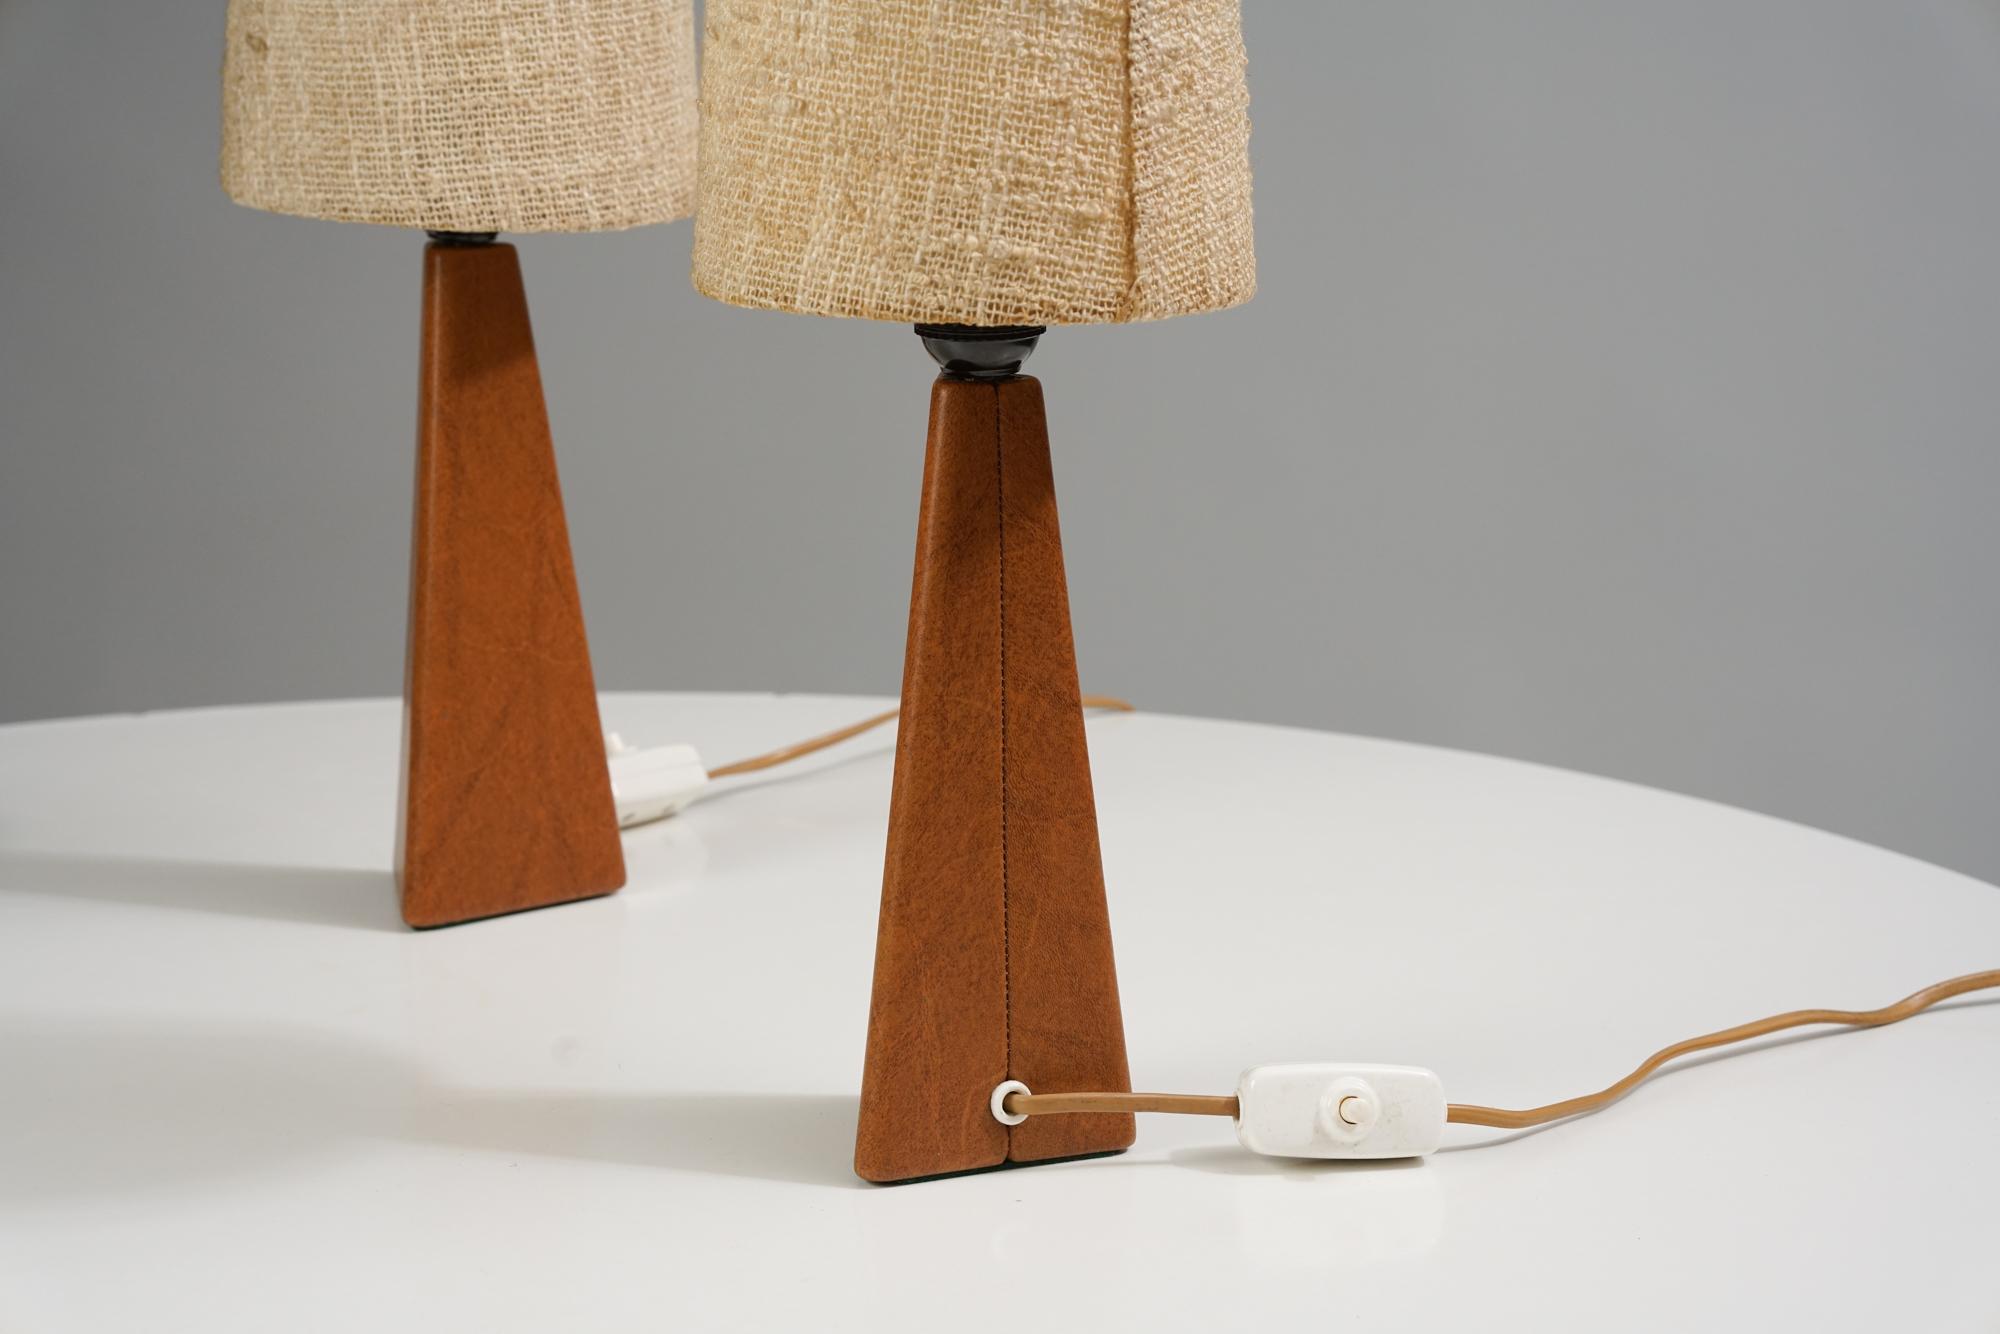 Scandinavian Modern Set of Two Leather Table Lamps by Lisa Johansson-Pape for Orno, Mid-20th Century For Sale